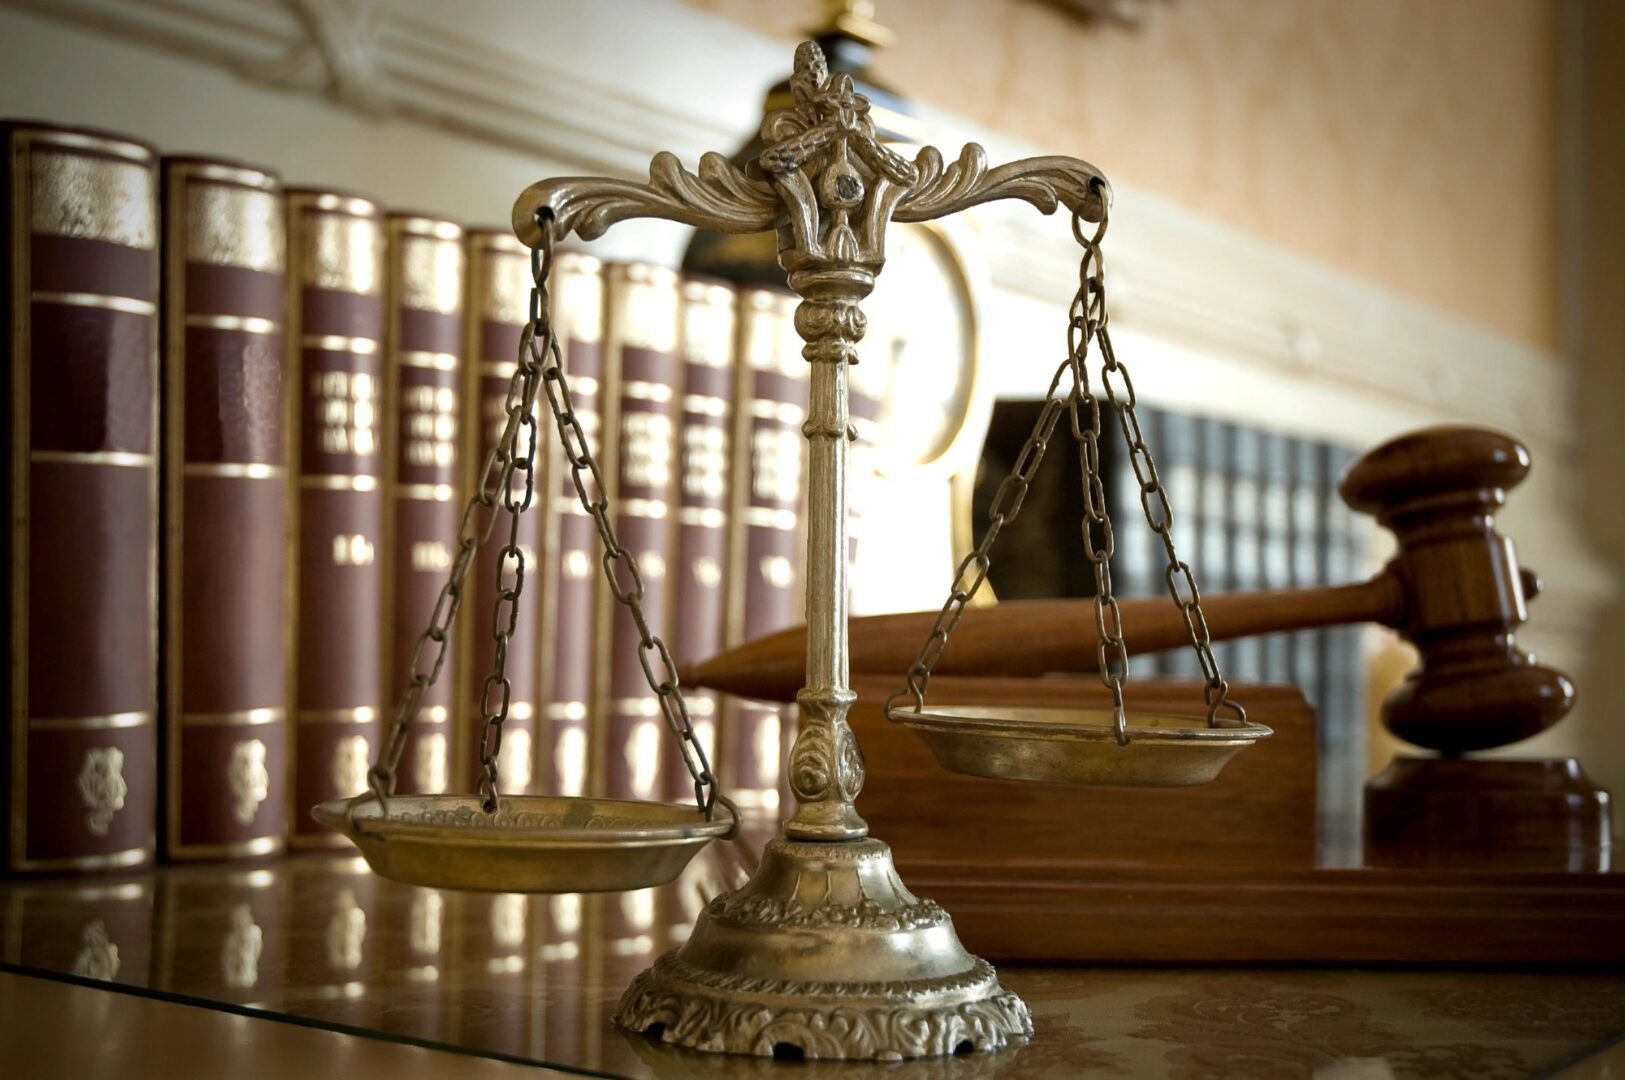 A close up of the scales of justice on top of a table.